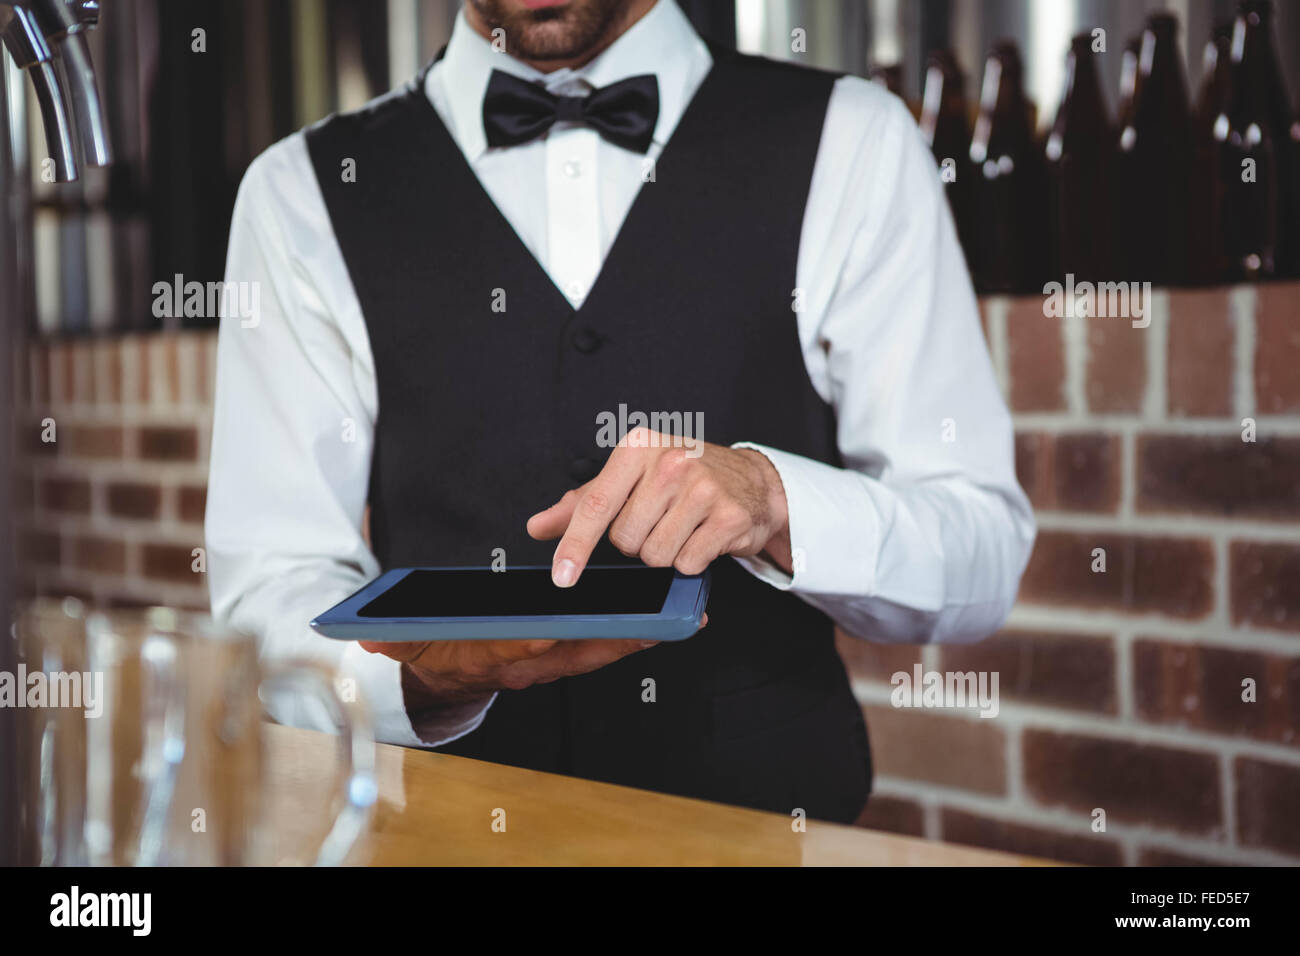 Handsome barman using tablet computer Stock Photo